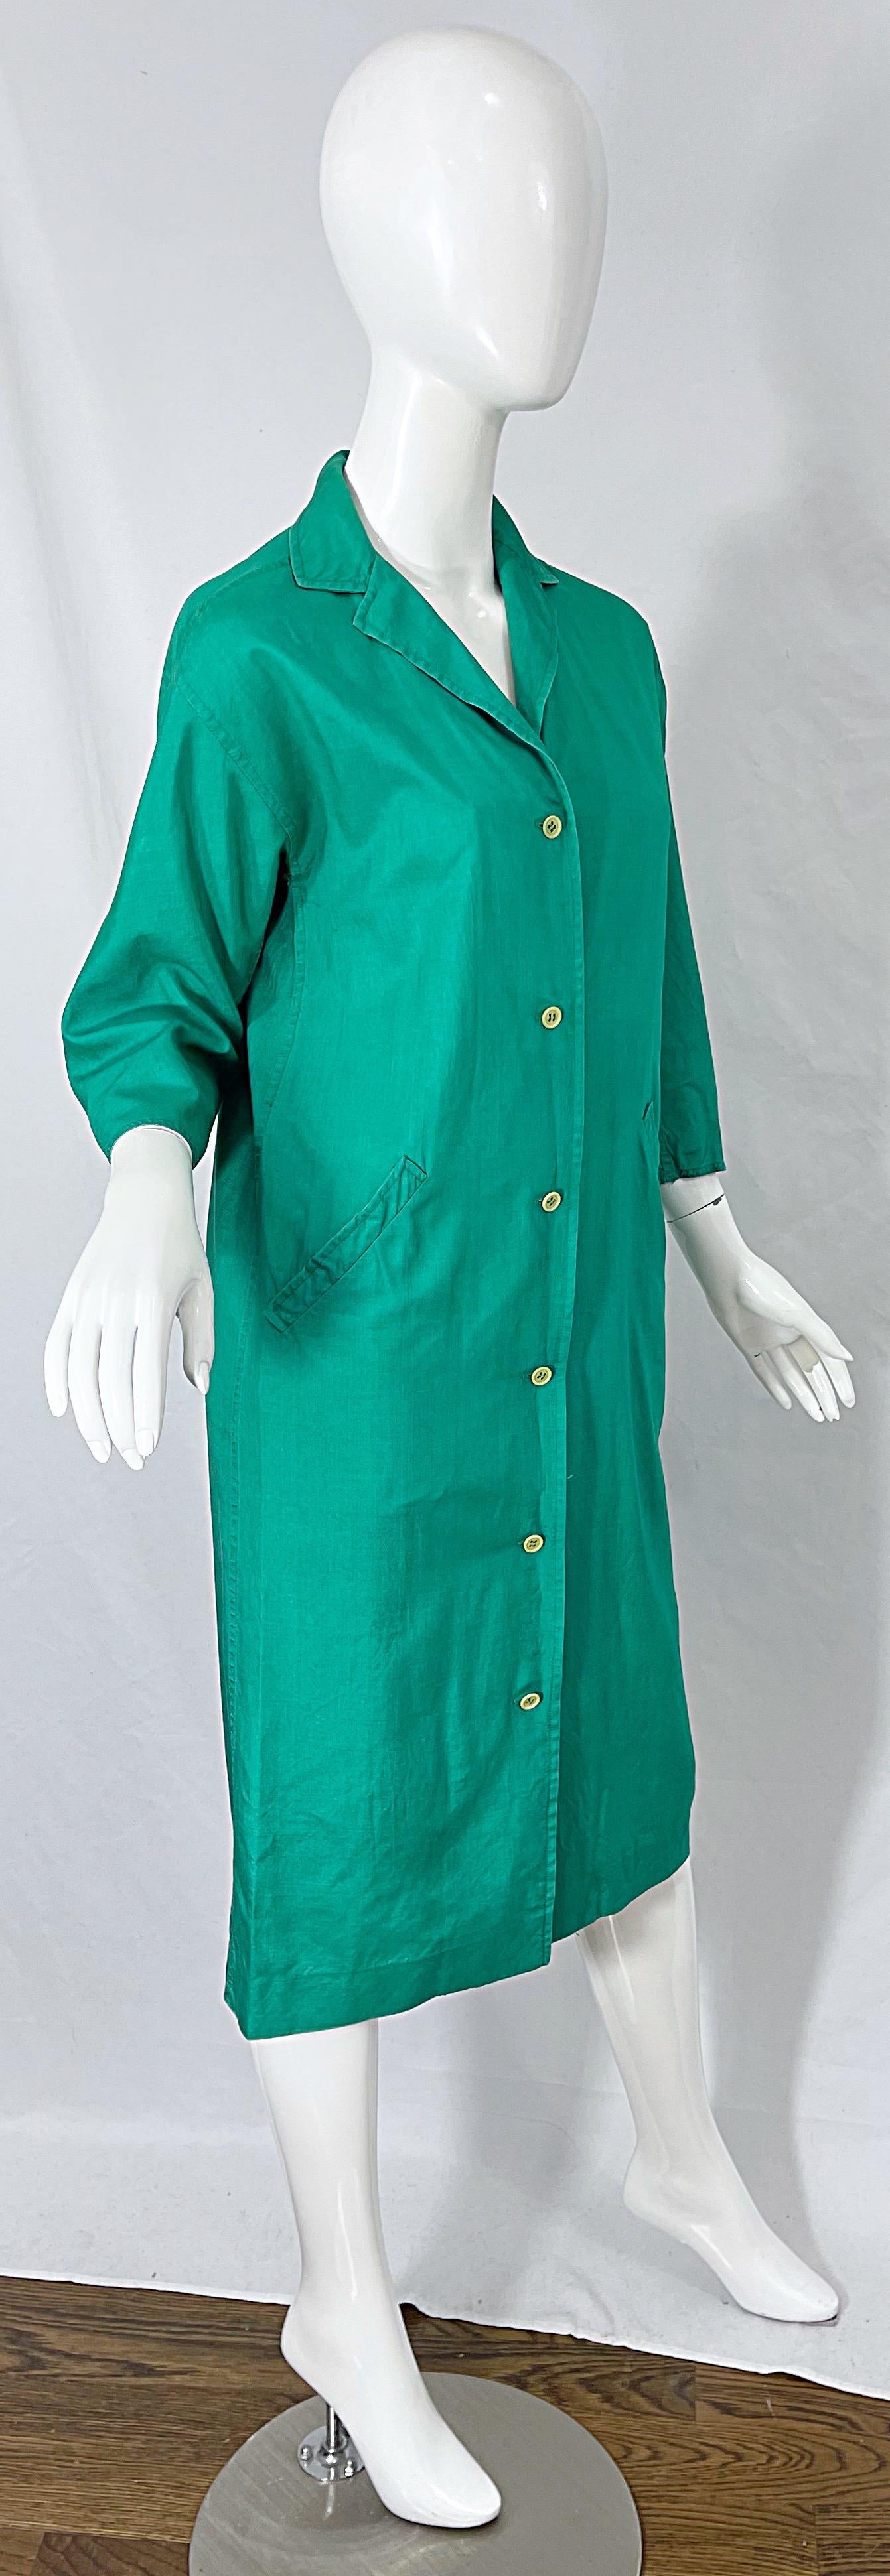 1970s Halston Kelly Green Silk 3/4 Sleeves Vintage 70s Shirt Dress w/ Pockets For Sale 2